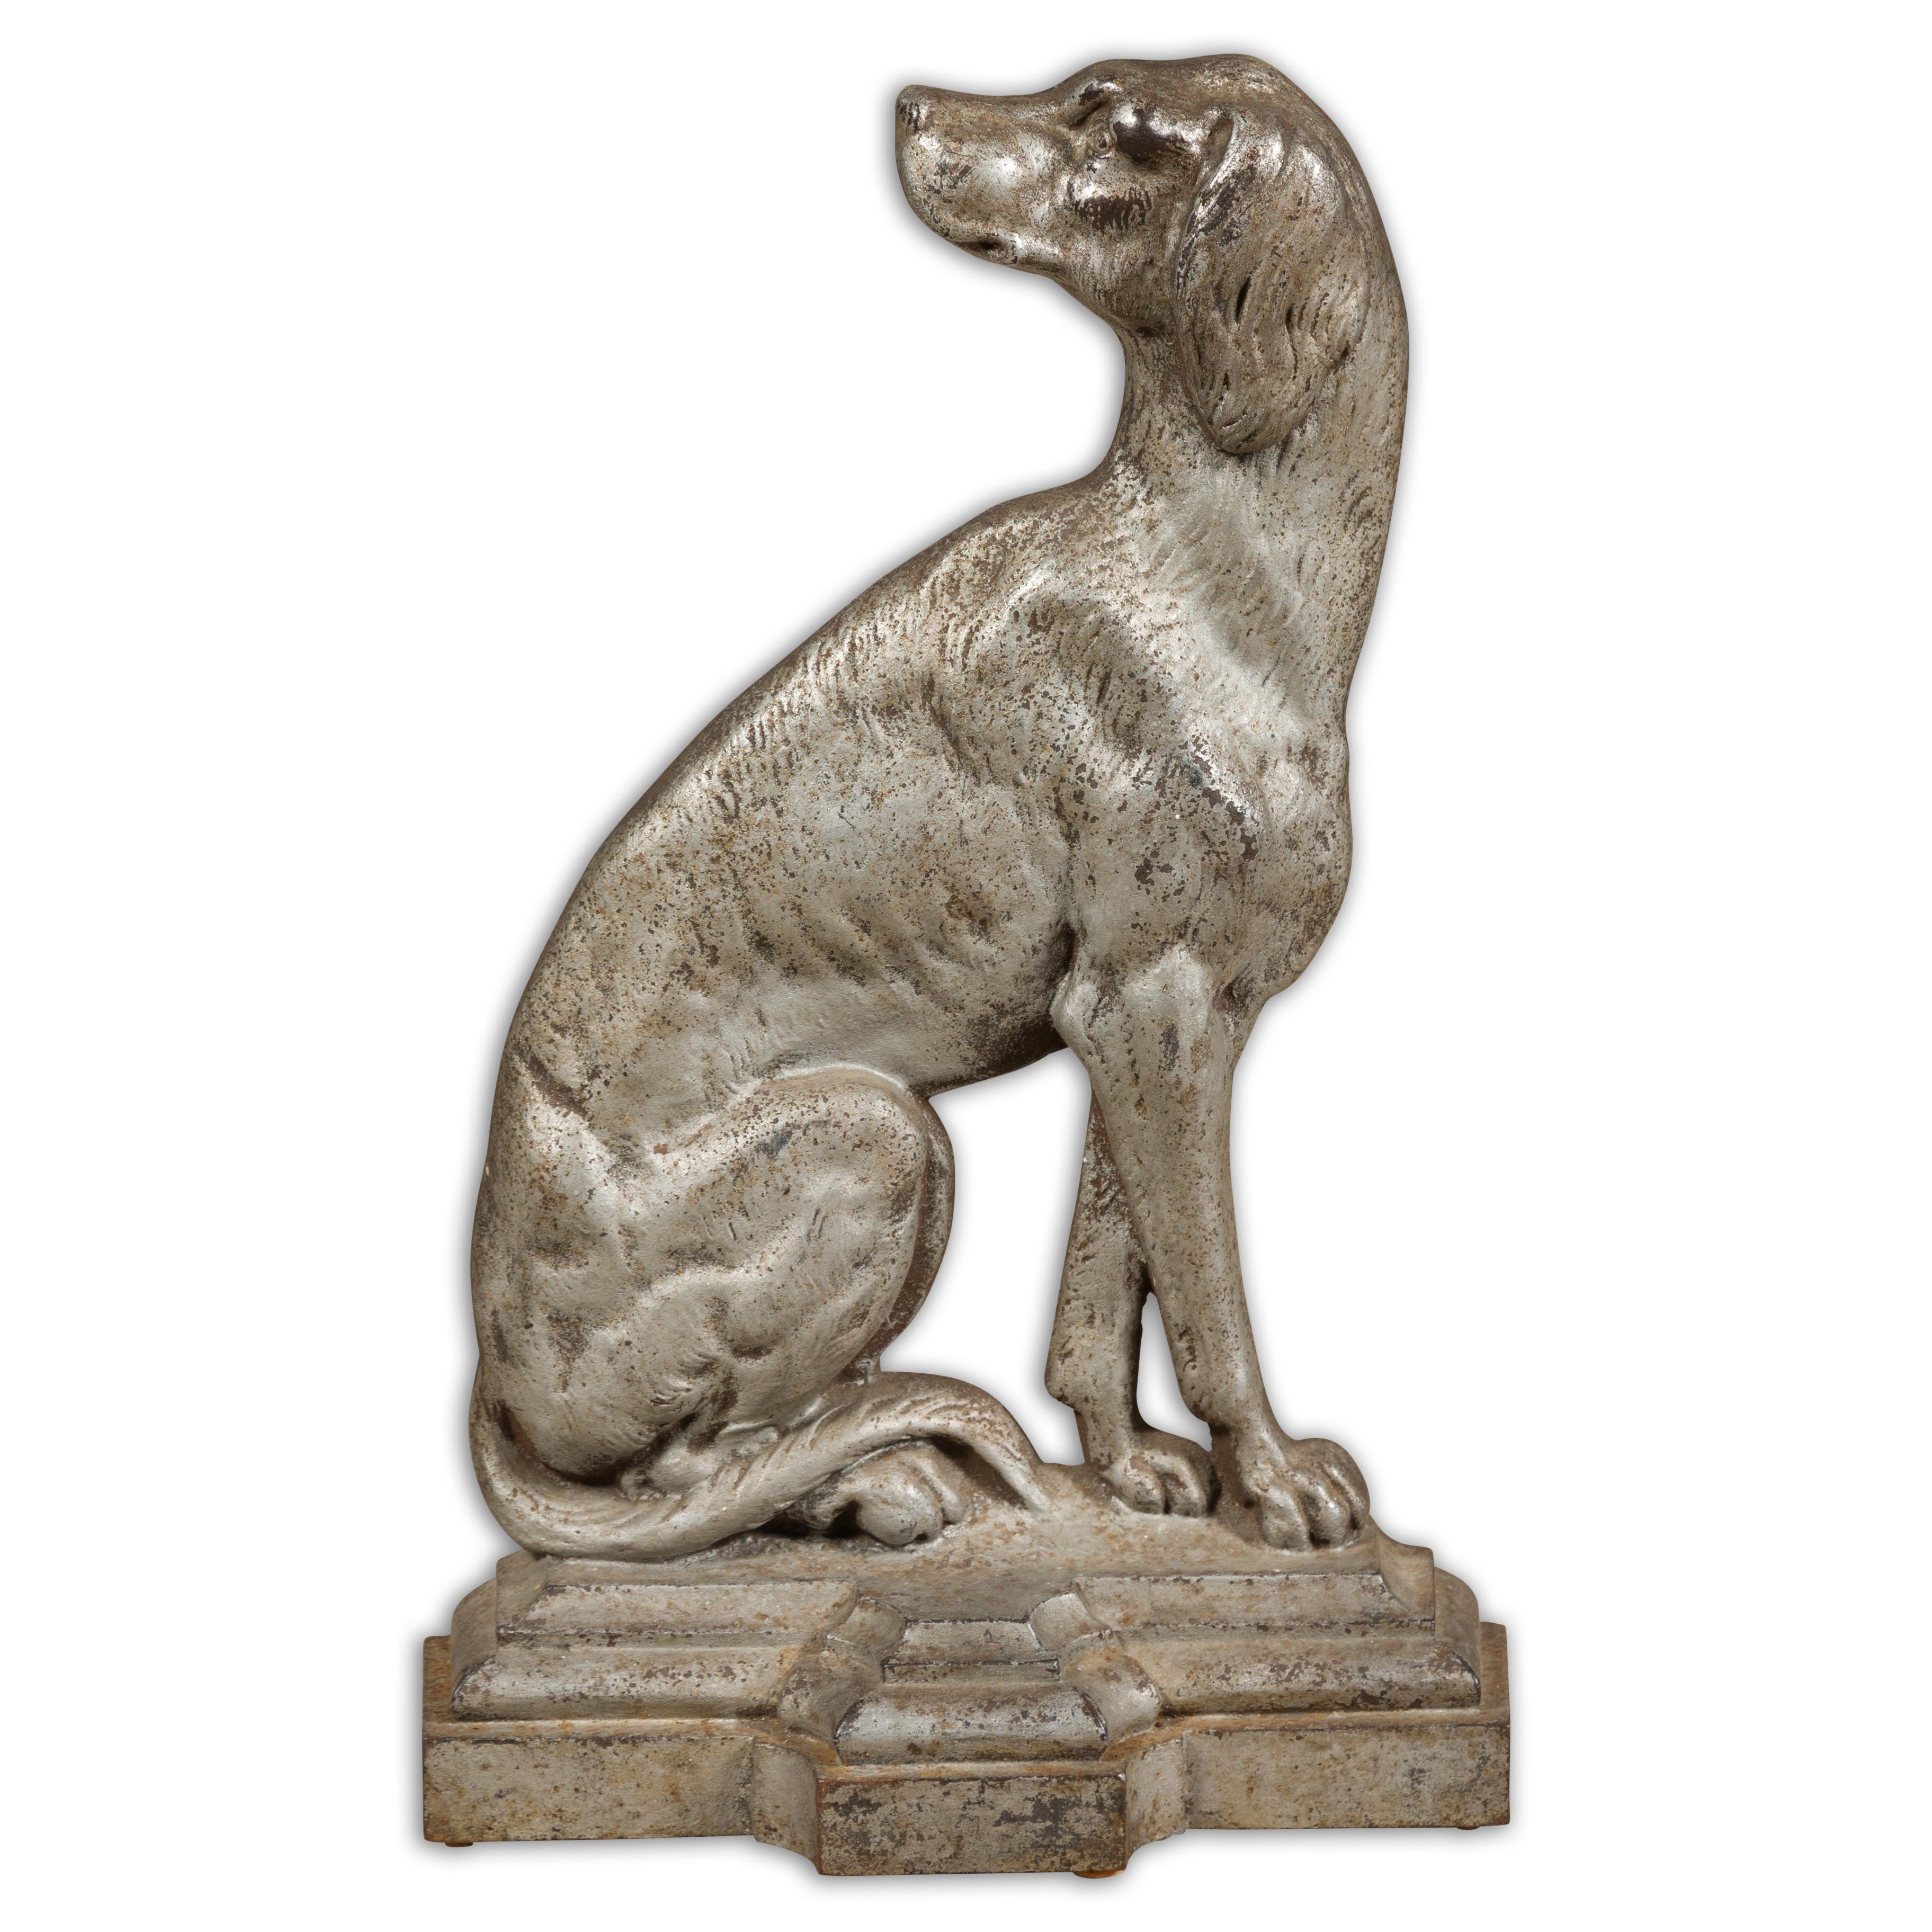 An English Late Victorian period silvered door stop from circa 1880-1900 showcasing a dog depicted in profile. This English Late Victorian period silvered door stop, dating from circa 1880-1900, is a captivating blend of utility and artistry.